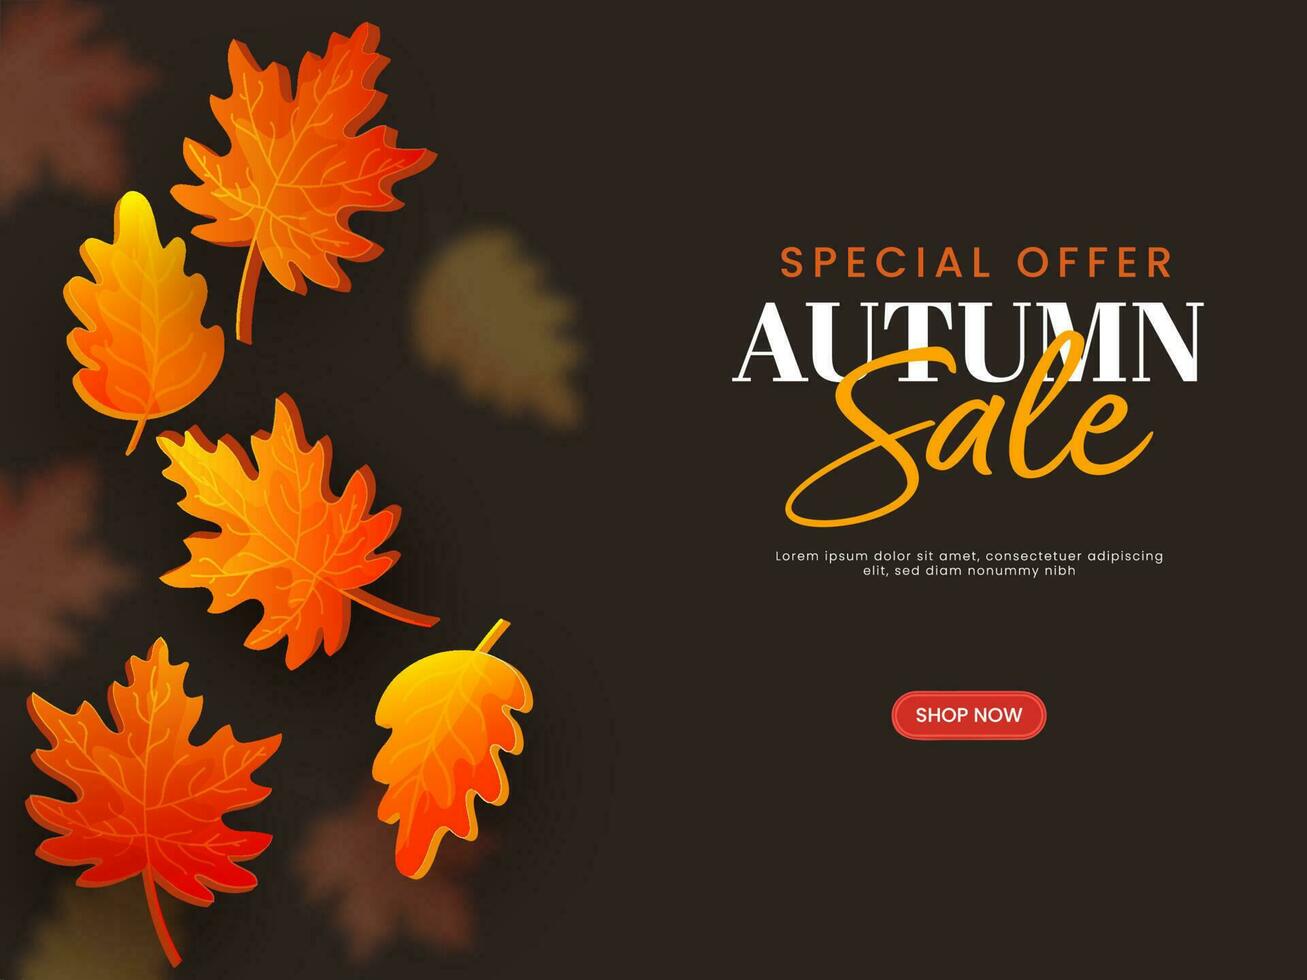 Autumn Sale Poster Design With 3D Autumnal Leaves On Brown Background. vector